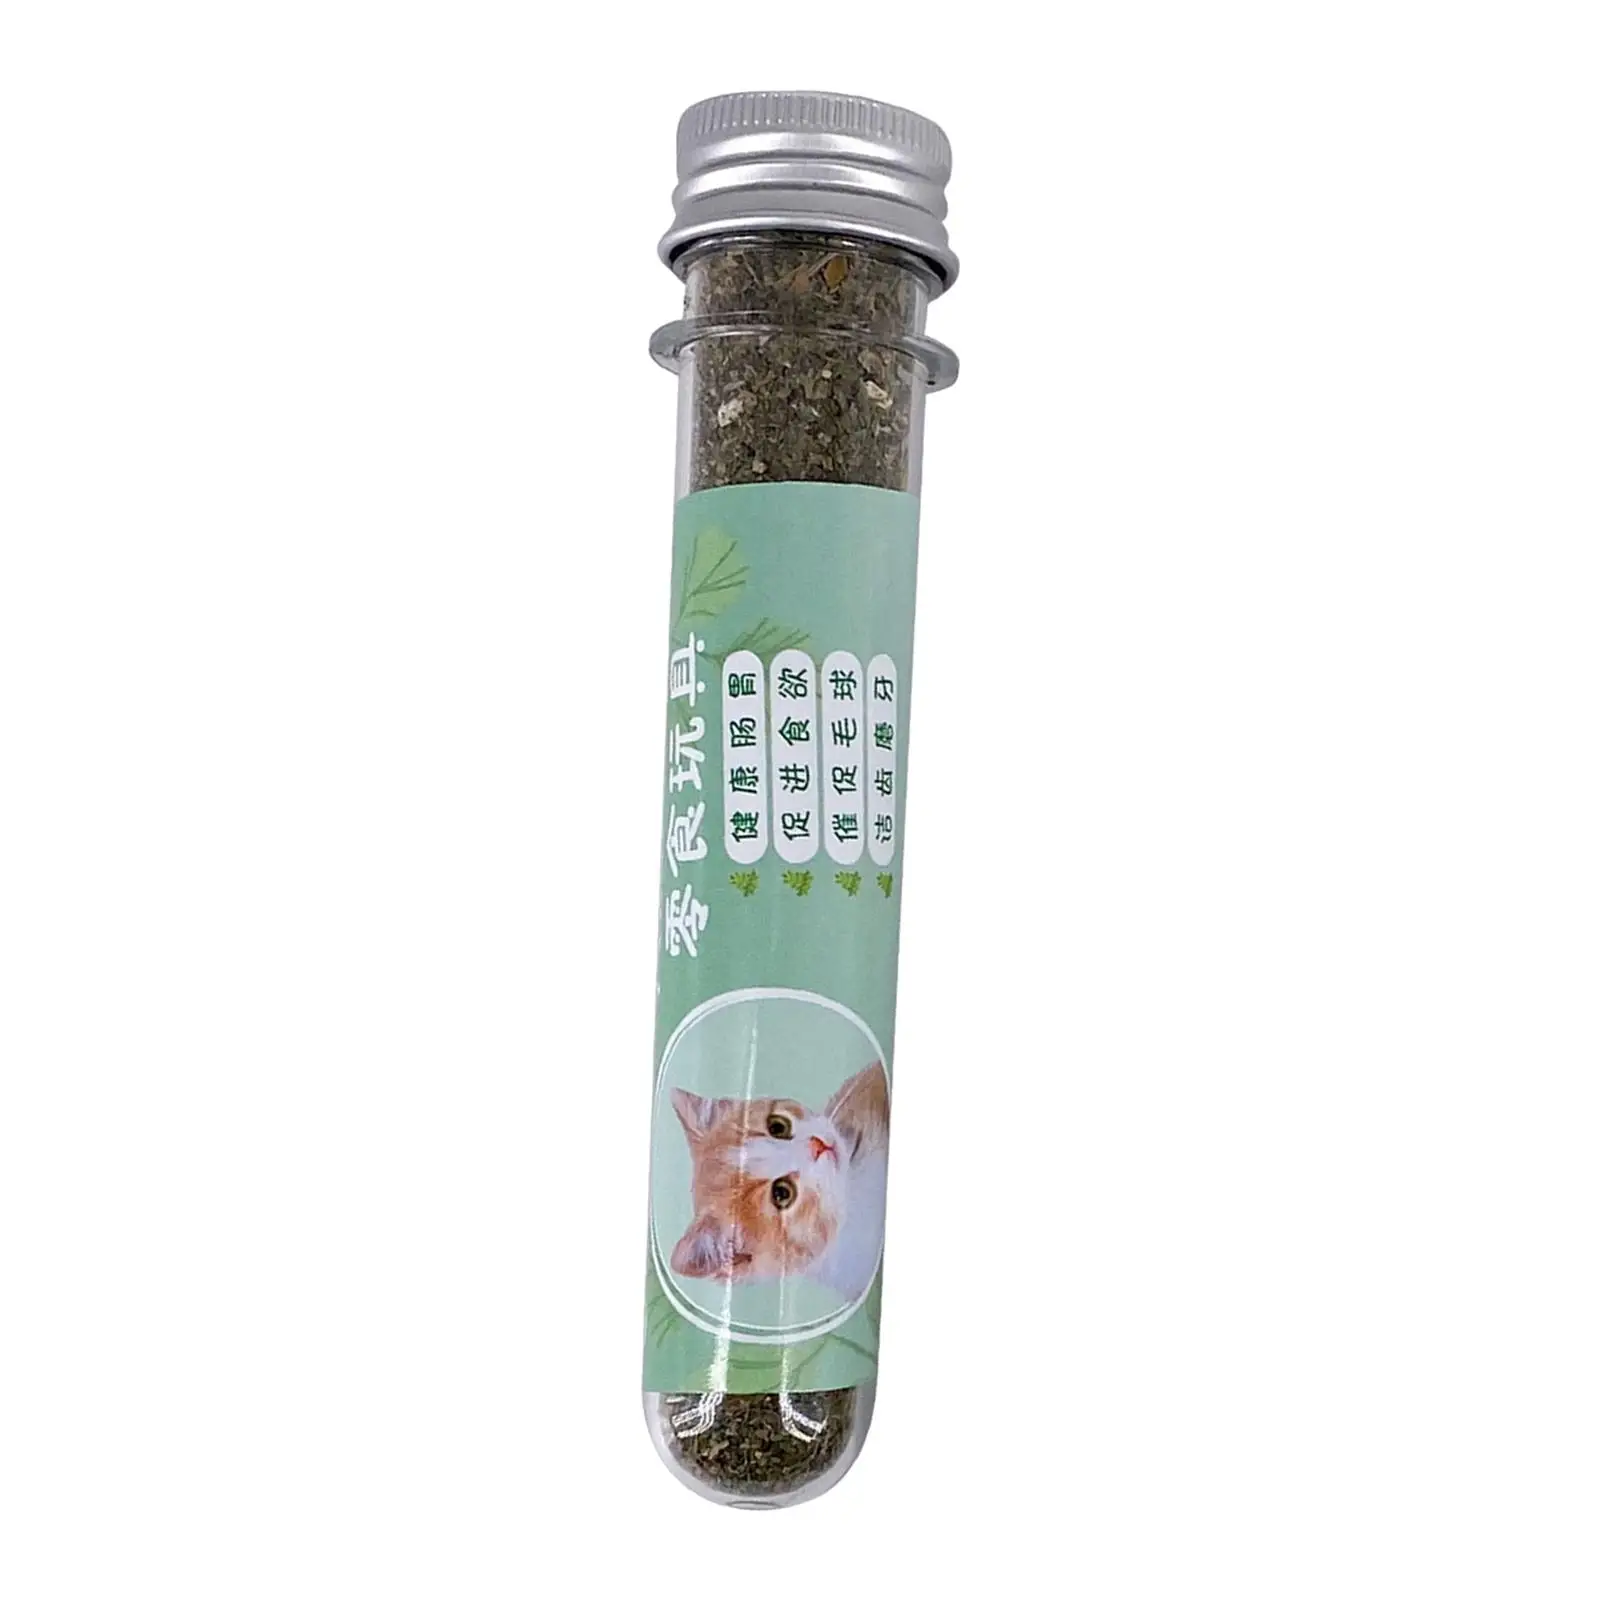 Catnip for Cats Premium Quality Strong Dried Catnip for Cat Toys Catnip for Cat Calming Scratch Pad Cat Bed Cat Toys